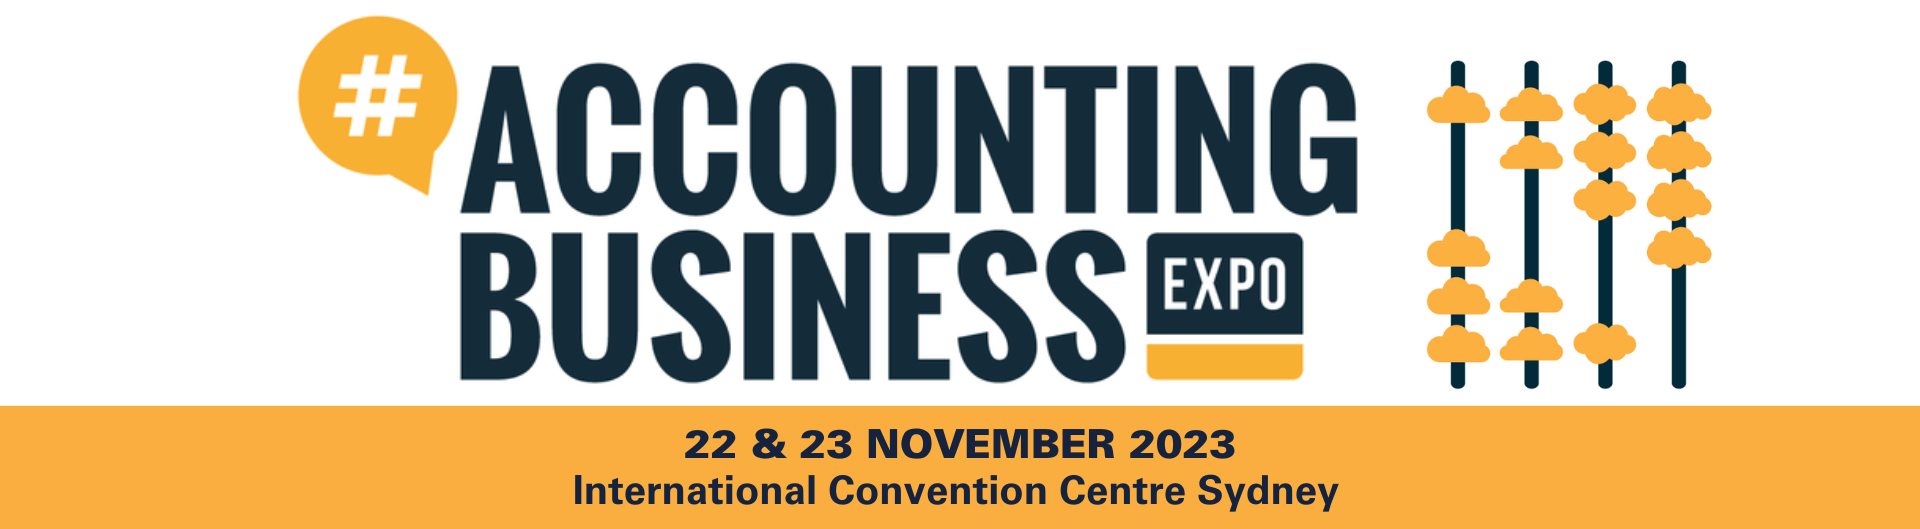 Accounting Business Expo 2023 ICC Sydney